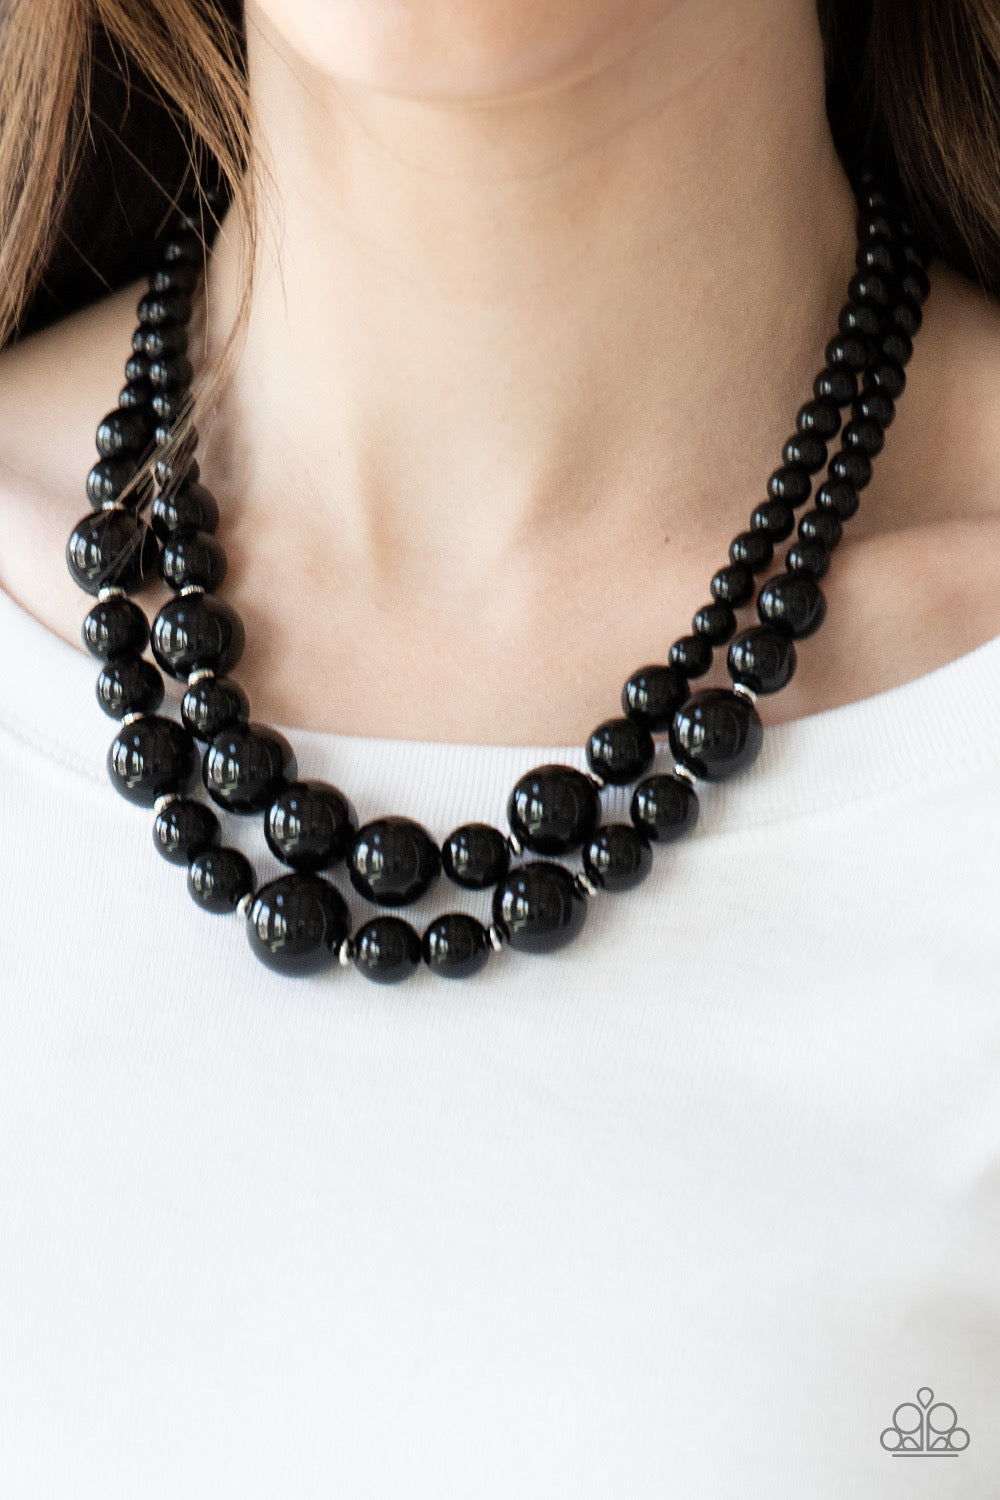 Paparazzi The More The Modest - Black Necklace -Paparazzi Jewelry Images 